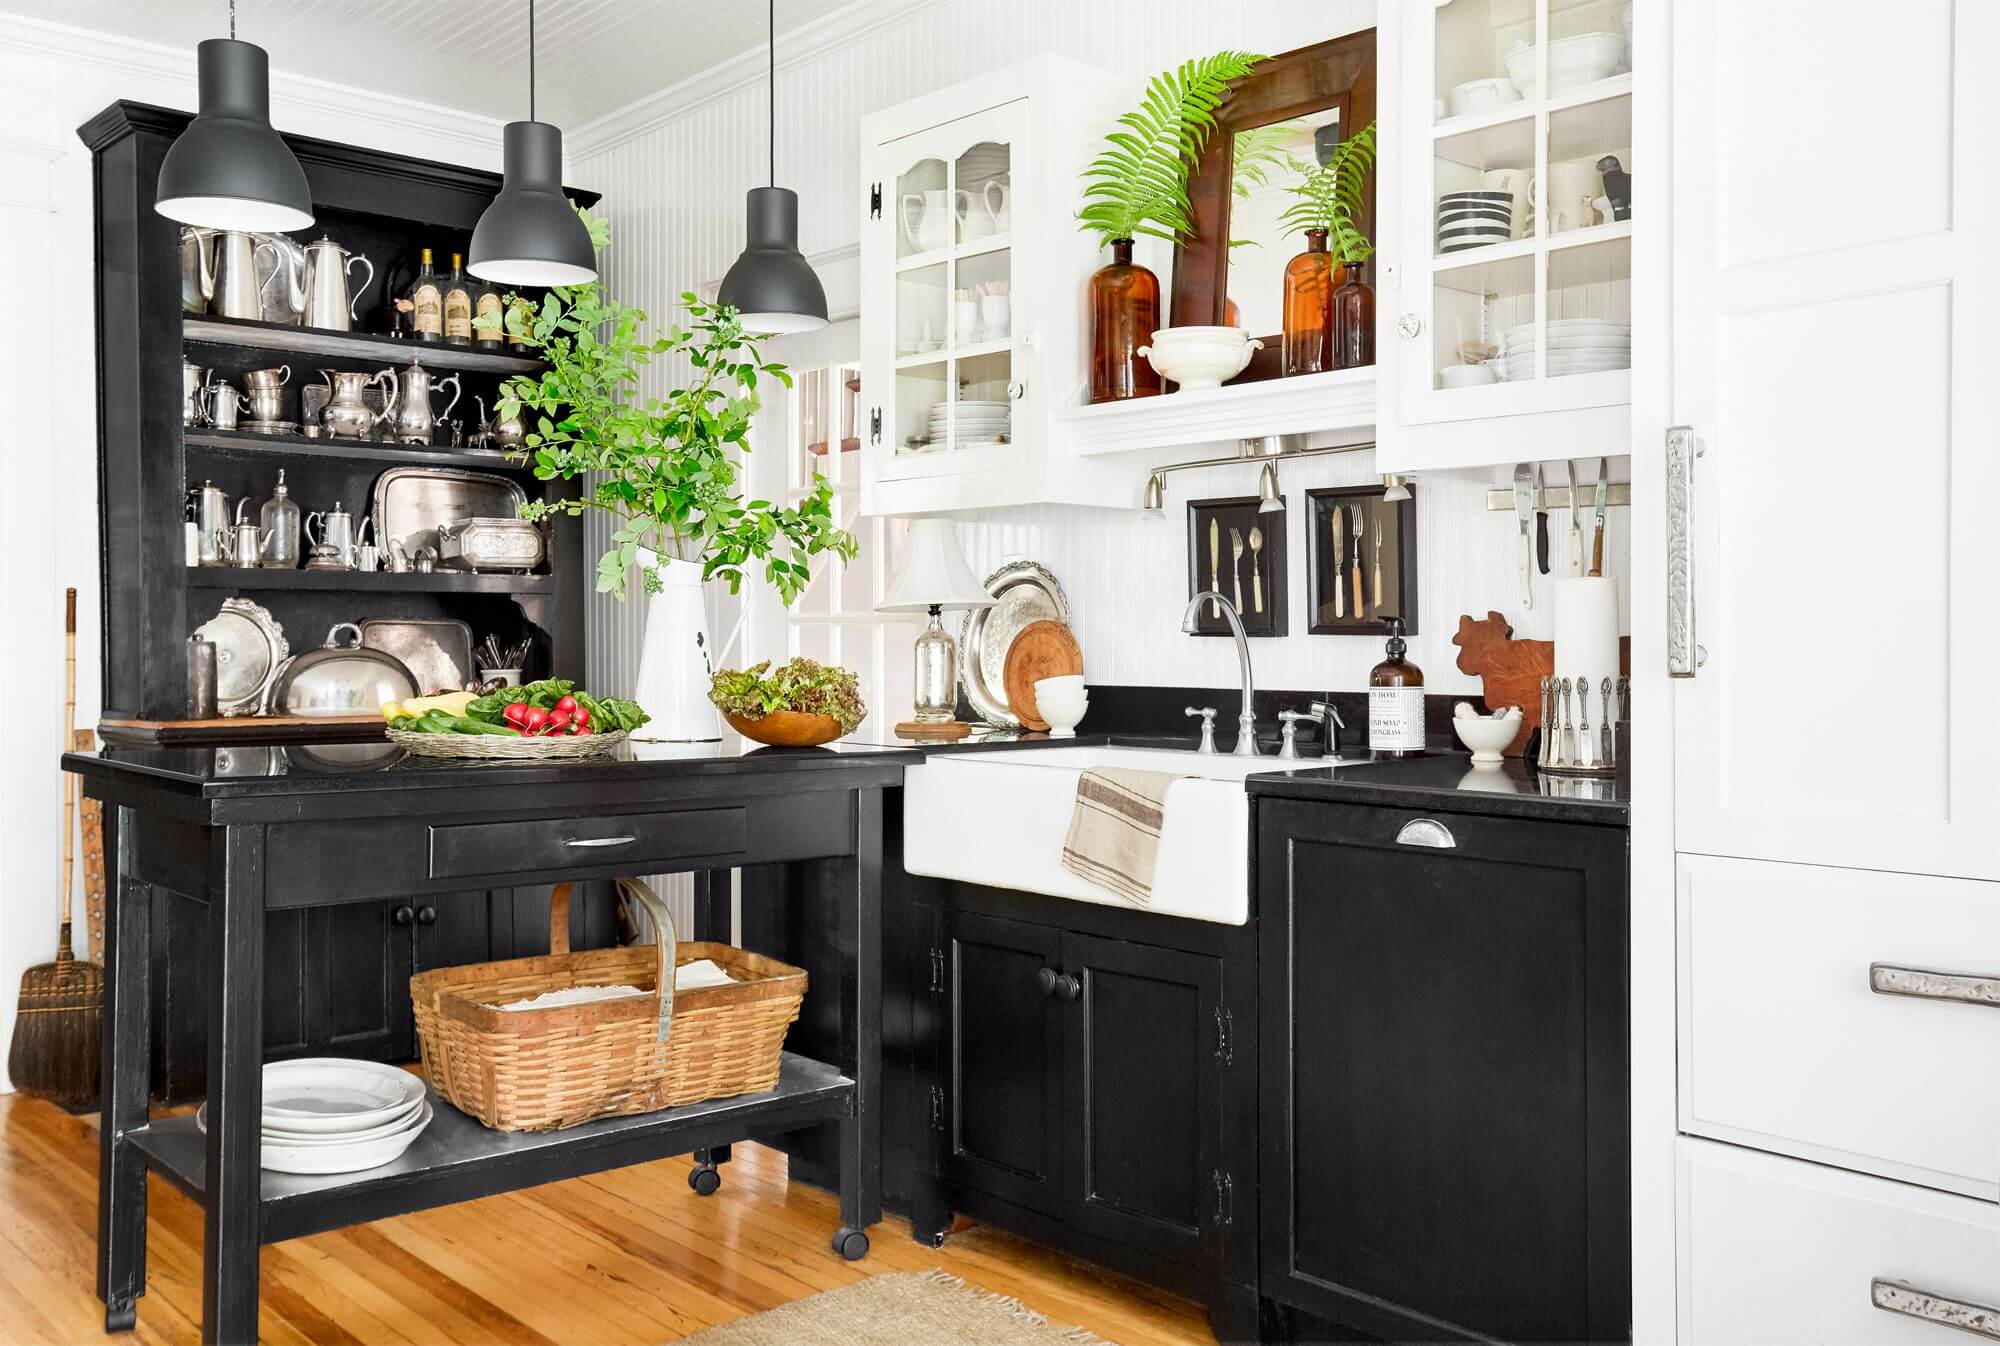 34 Farmhouse Kitchen Ideas for the Perfect Rustic Vibe ...